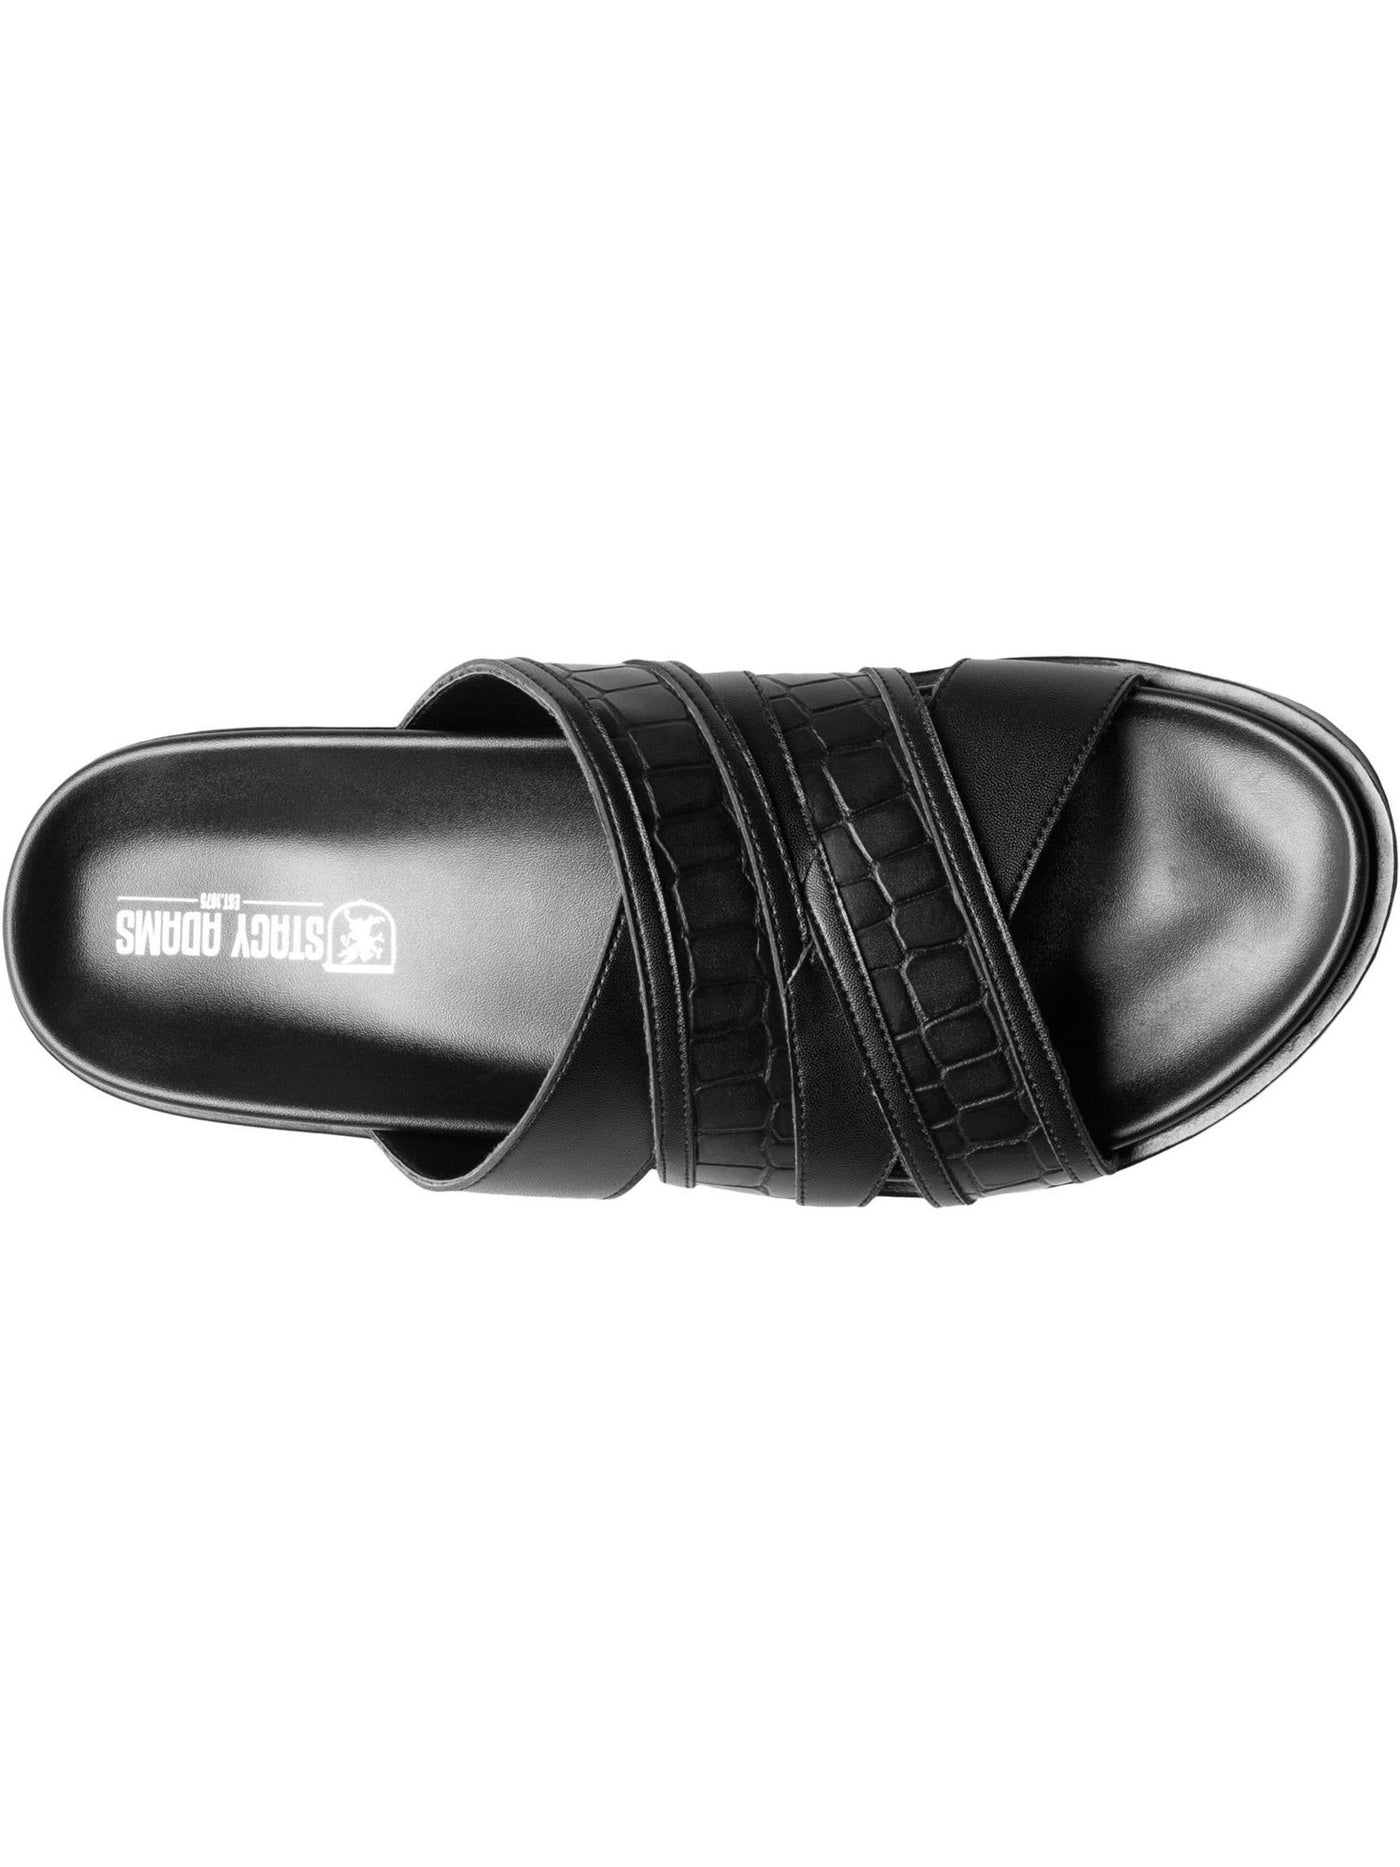 STACY ADAMS Mens Black Mixed Media Cushioned Mondo Open Toe Slip On Slide Sandals Shoes 11 M